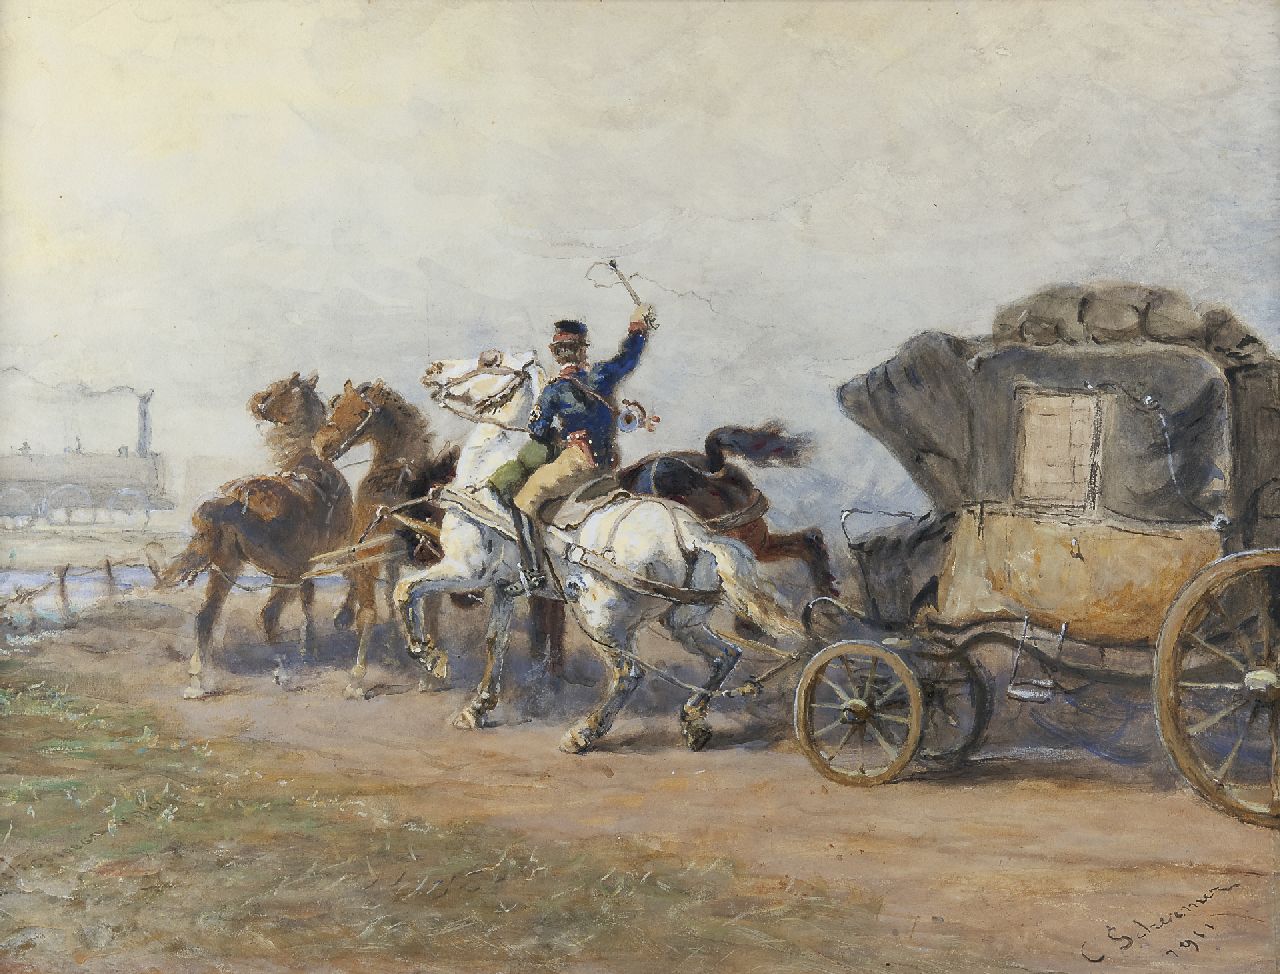 Schermer C.A.J.  | Cornelis Albertus Johannes Schermer, Coming to a stop for the train, watercolour on paper 55.4 x 72.3 cm, signed l.r. and painted 1911